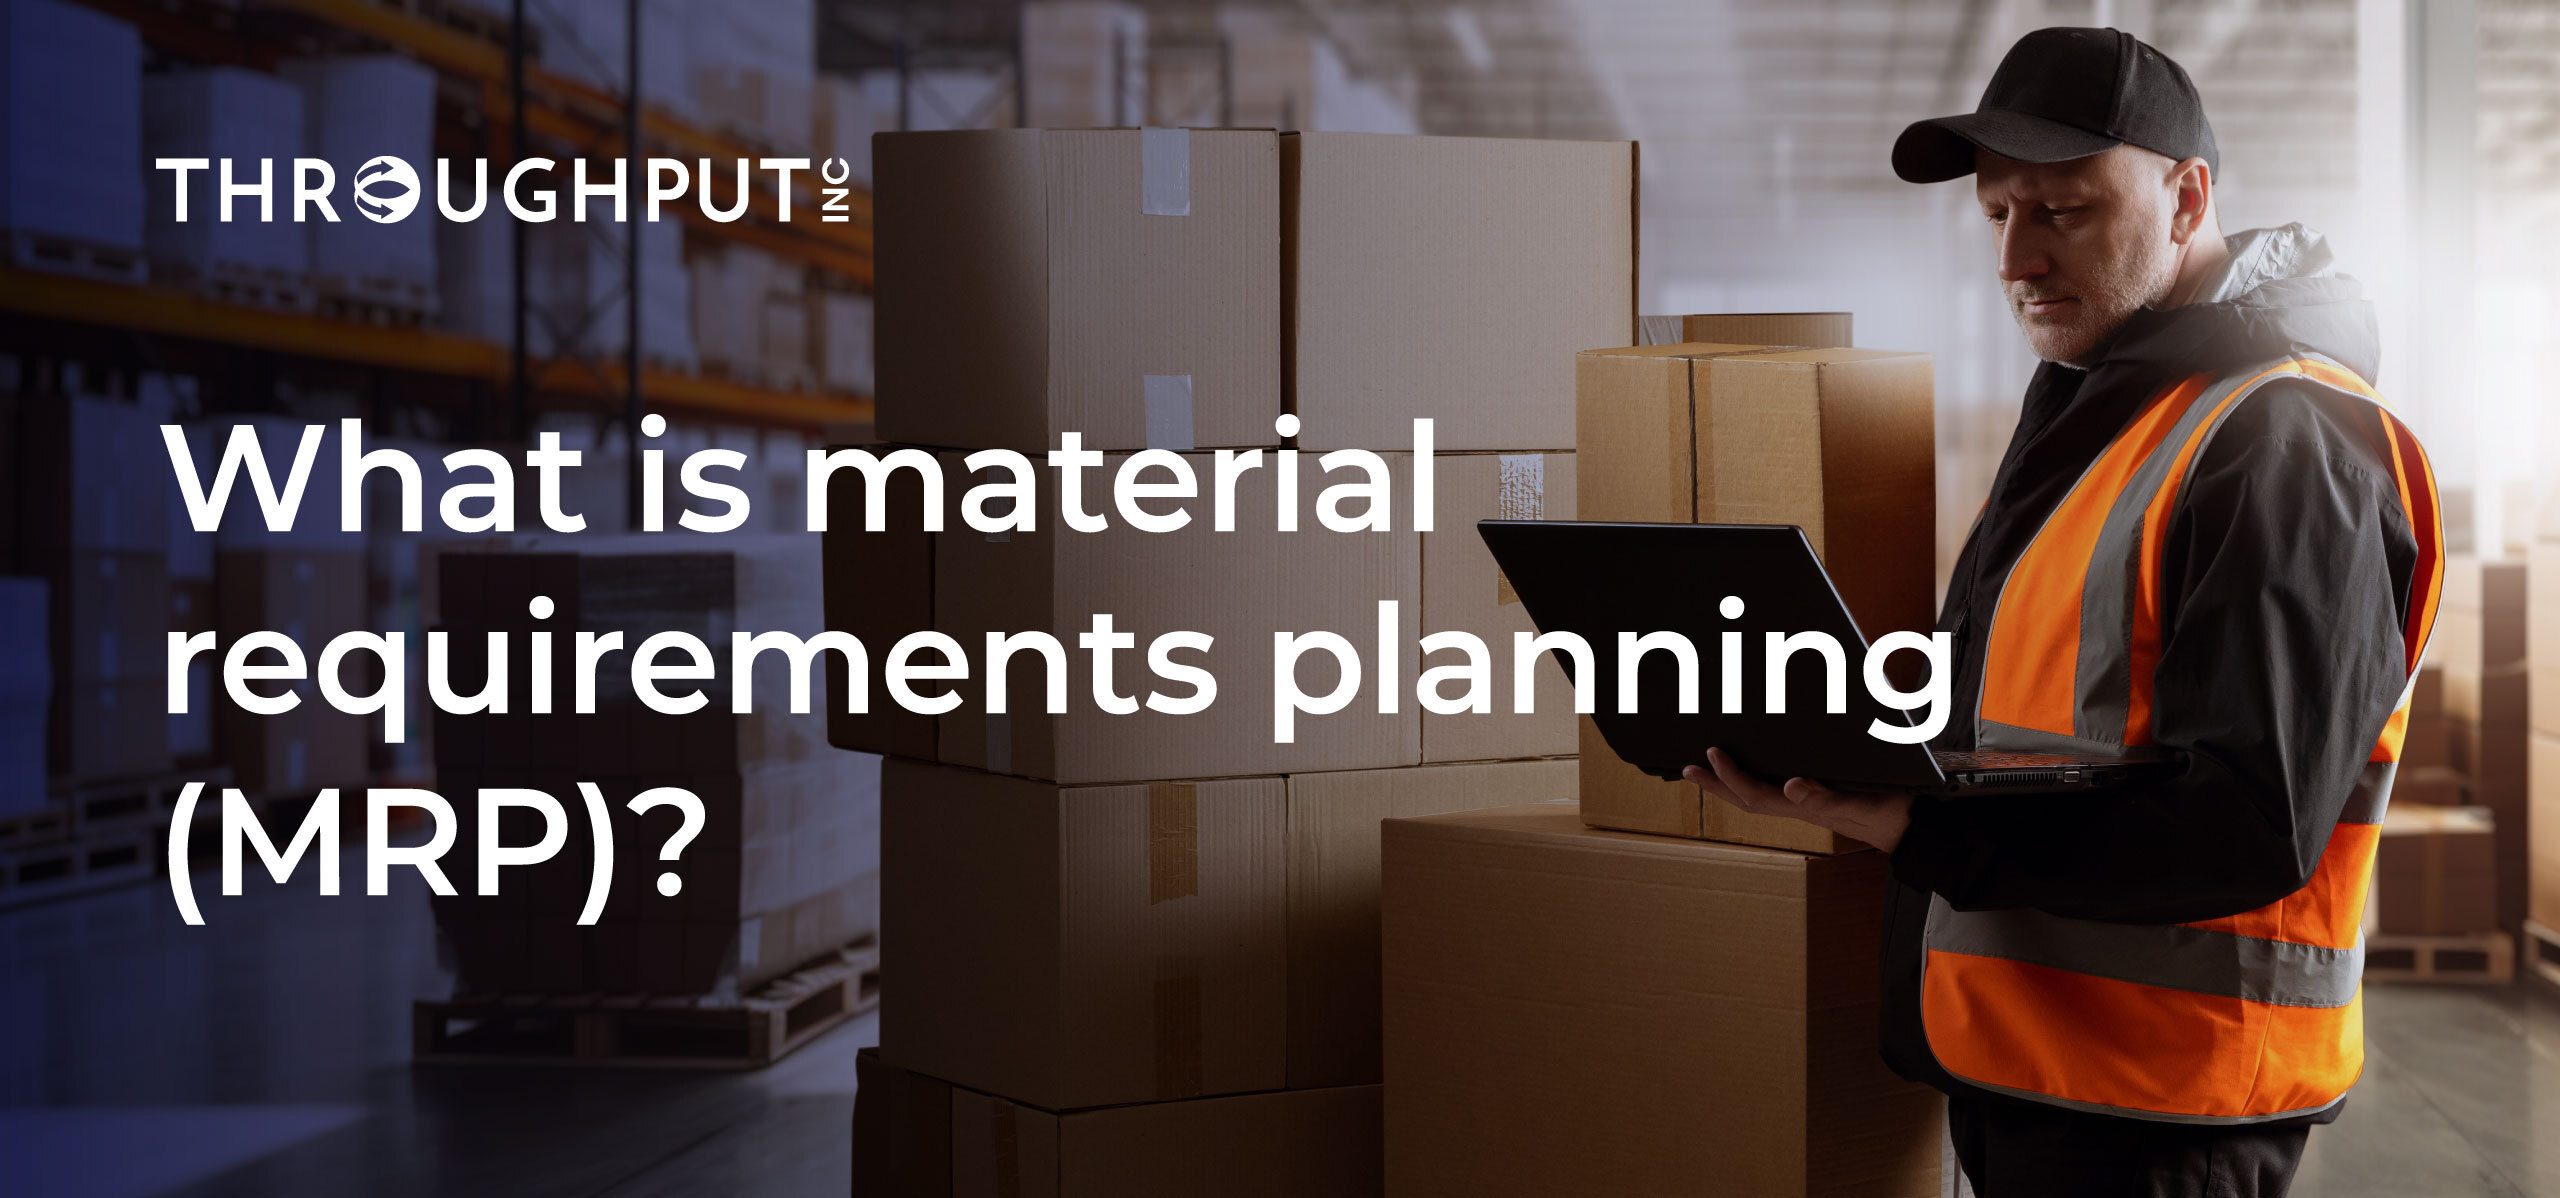 What is material requirements planning (MRP)?